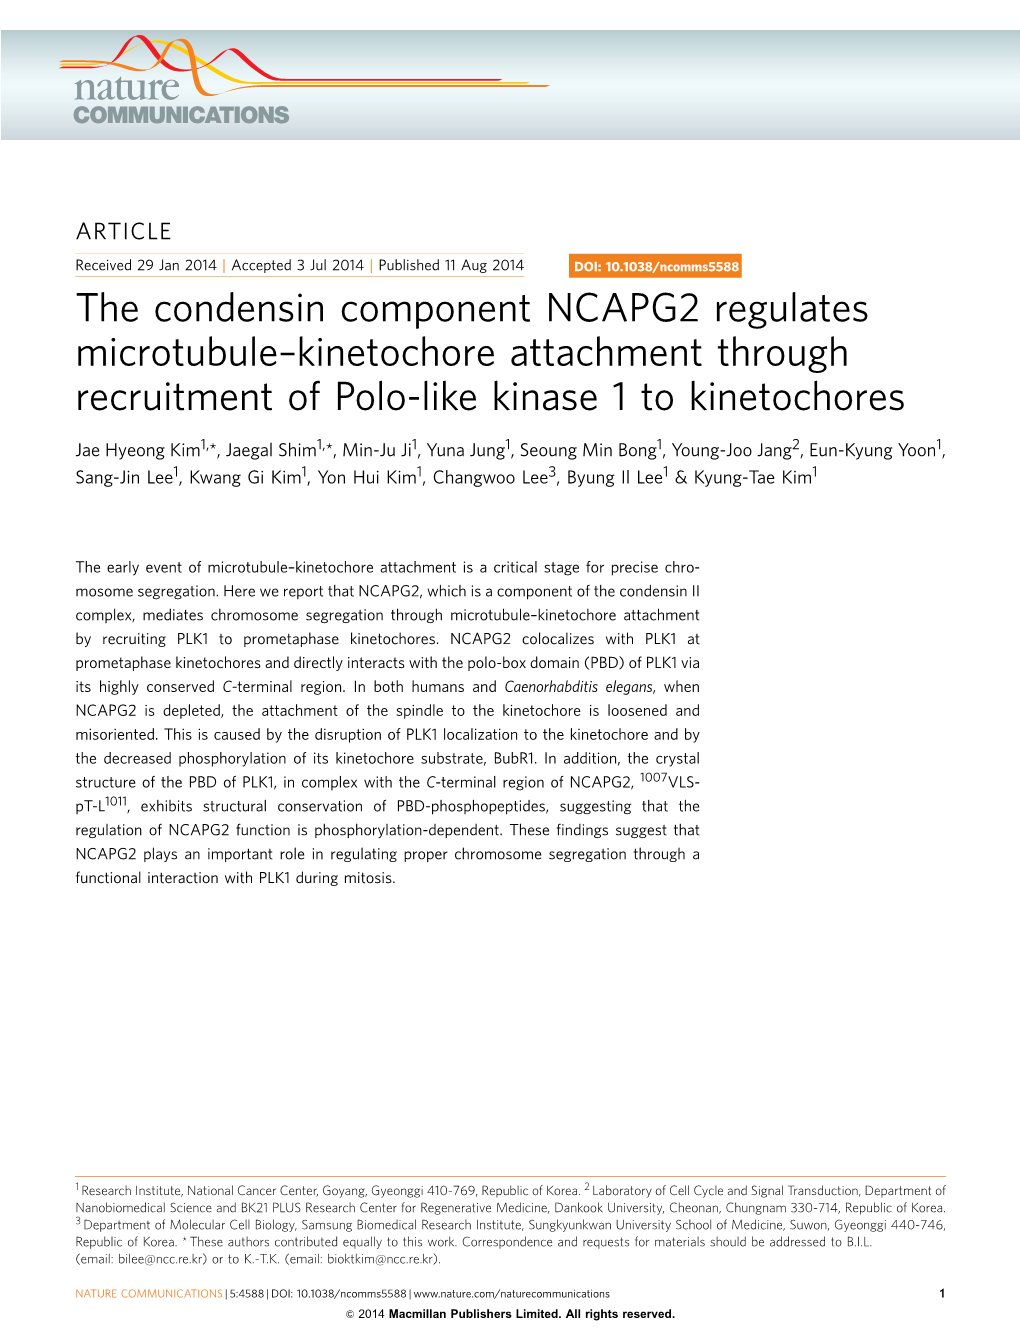 The Condensin Component NCAPG2 Regulates Microtubule–Kinetochore Attachment Through Recruitment of Polo-Like Kinase 1 to Kinetochores